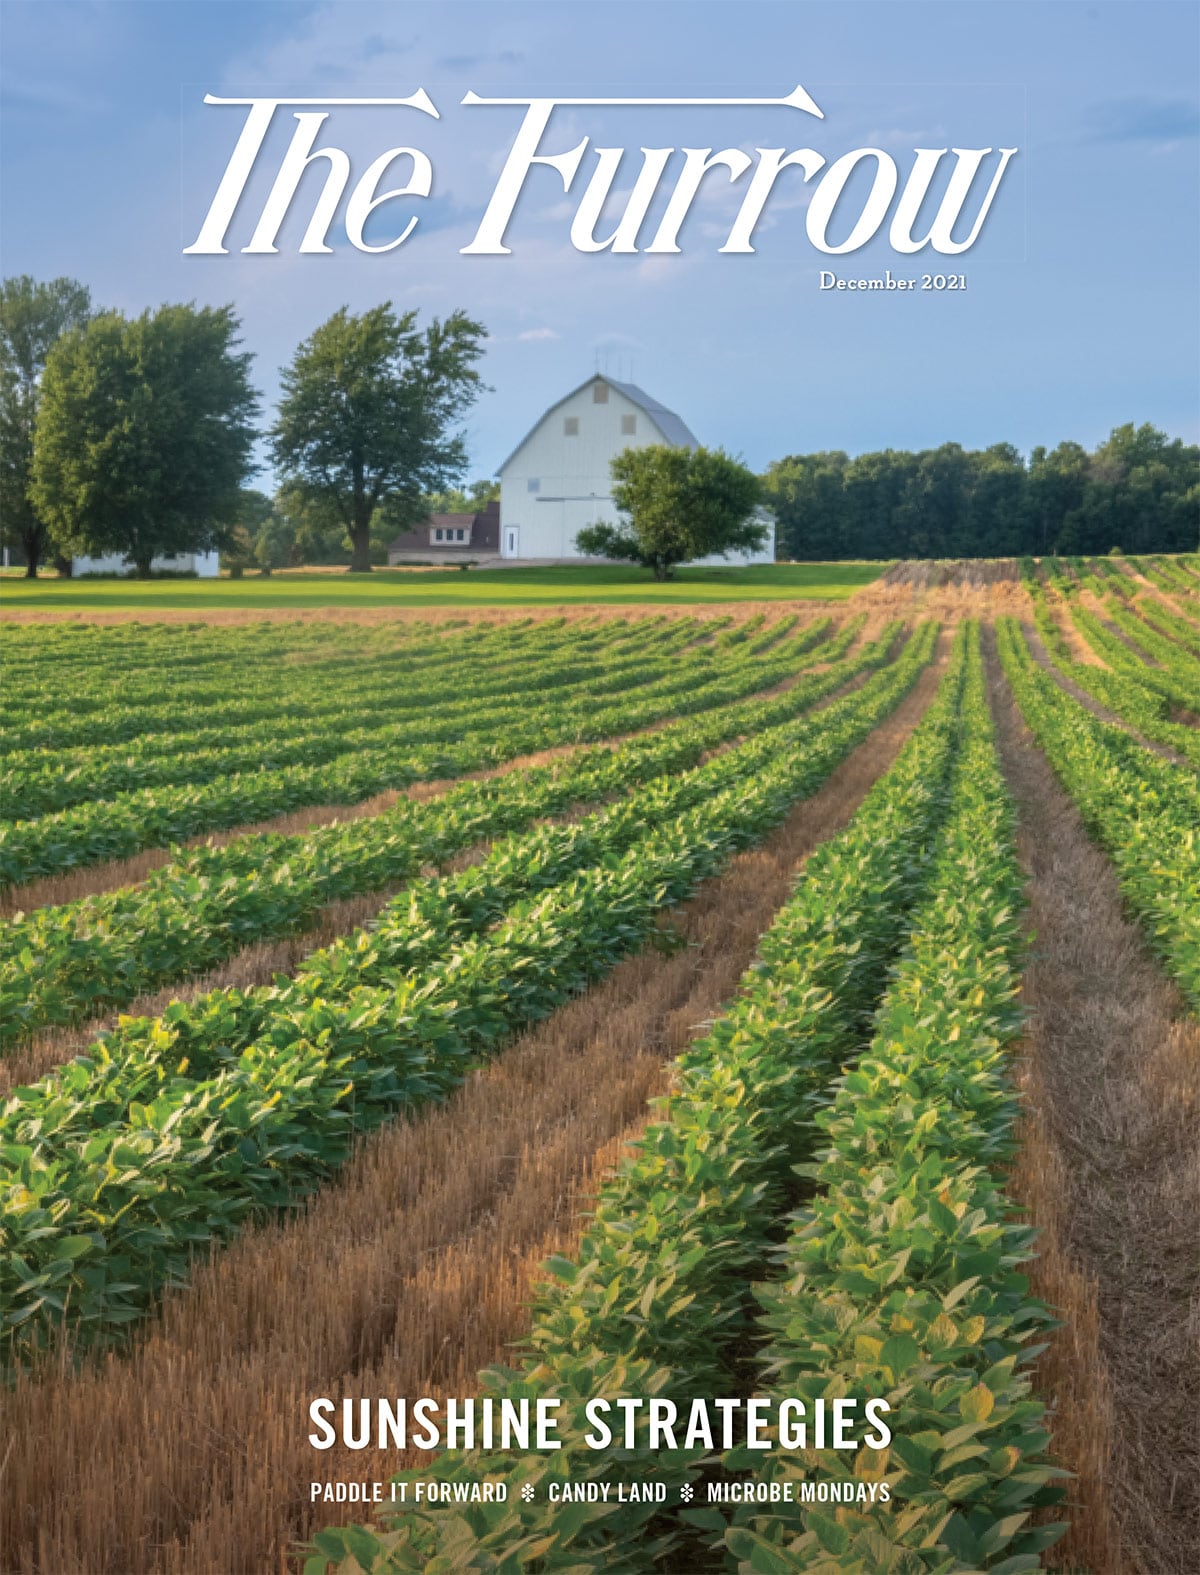 The Furrow - December 2021 Issue